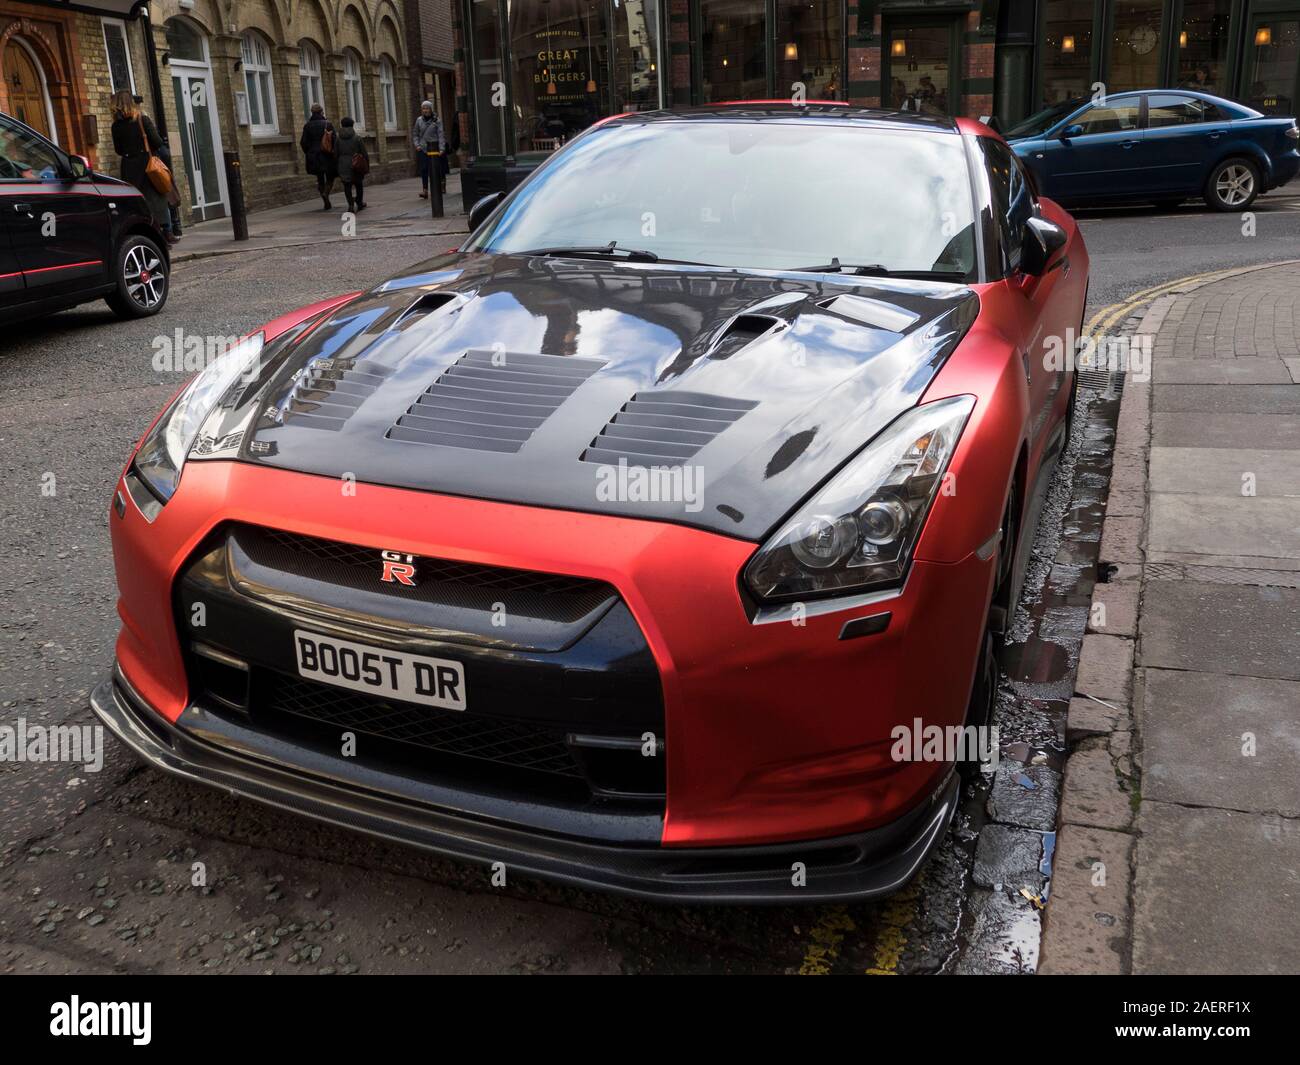 A Nissan GT-R car modified by Kream Developments. Stock Photo